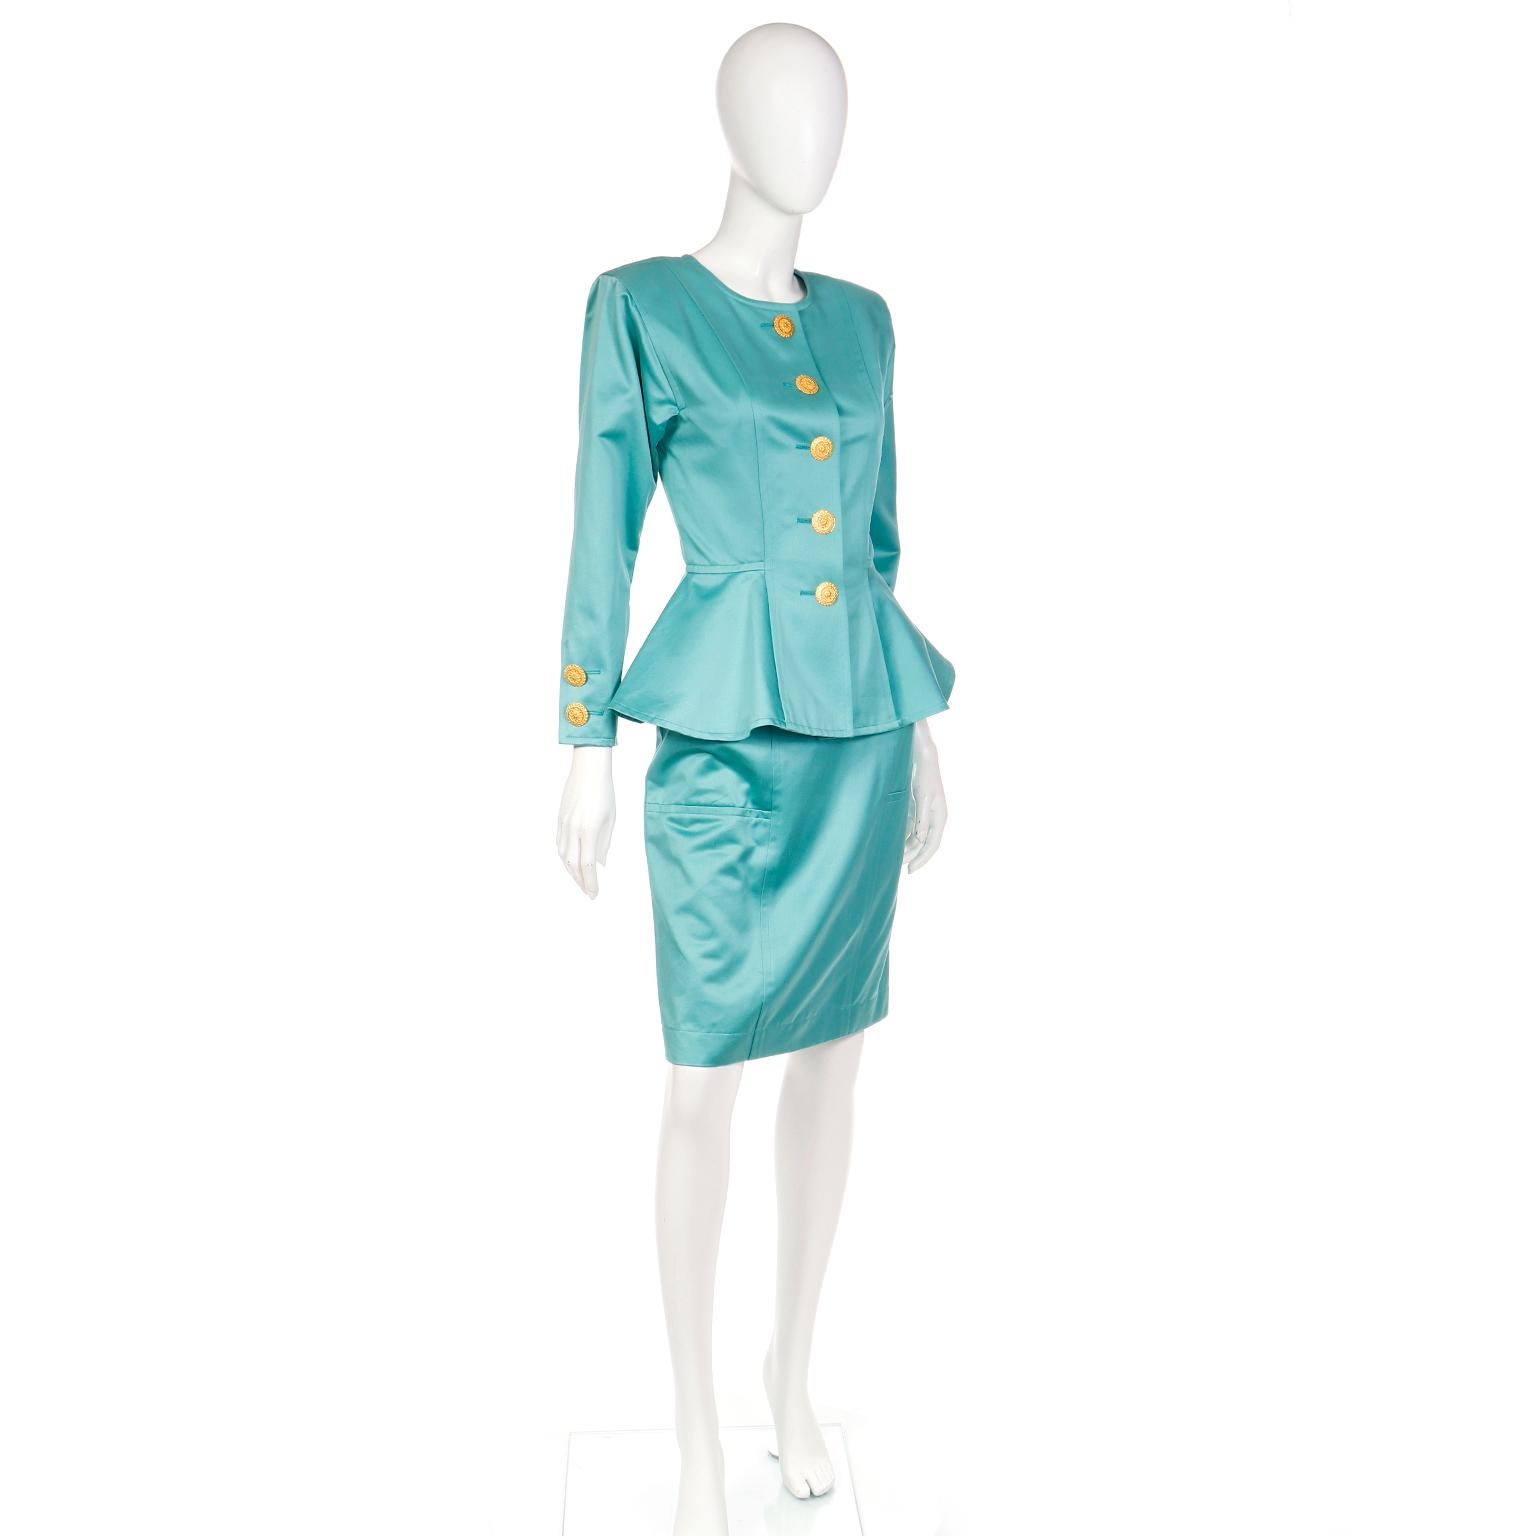 Yves Saint Laurent Vintage 1991 Green Peplum Jacket & Skirt Suit W/ Original Tag In Good Condition For Sale In Portland, OR